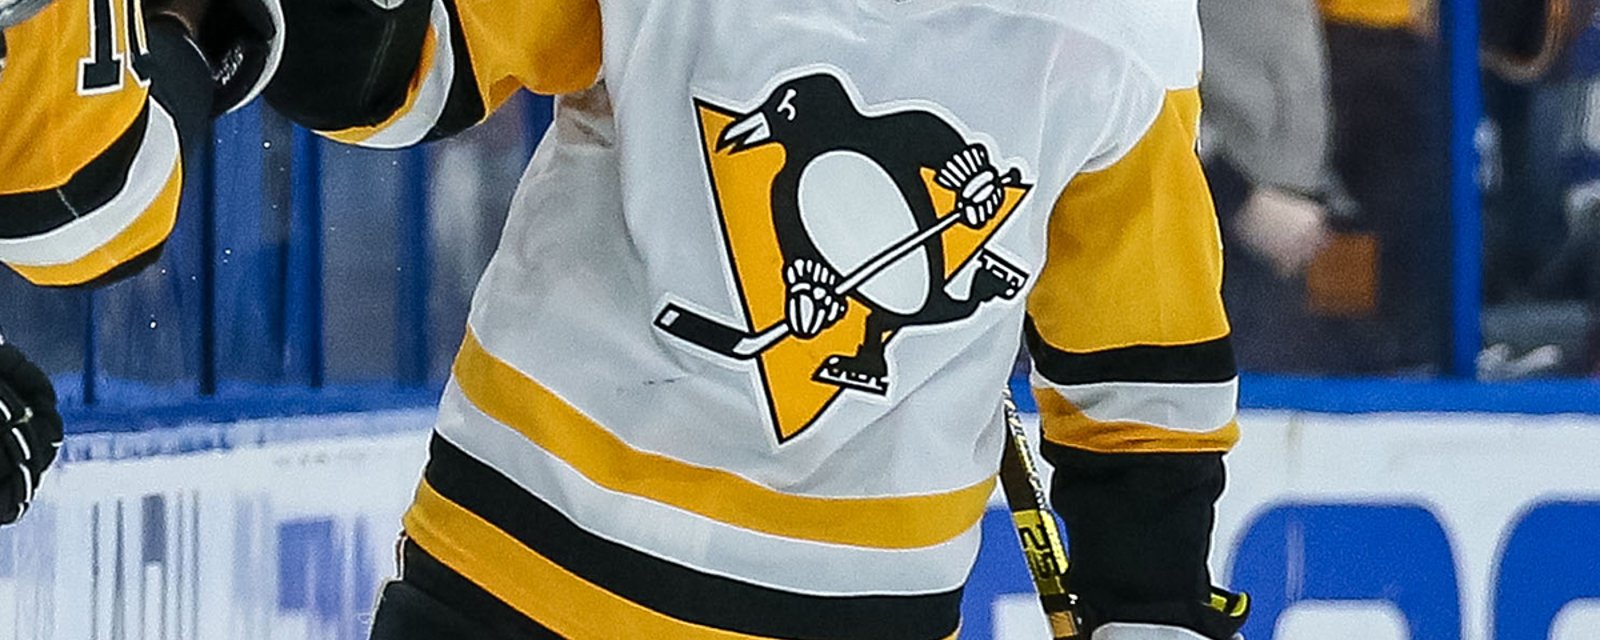  Breaking: Penguins pick up another defenseman in last minute move